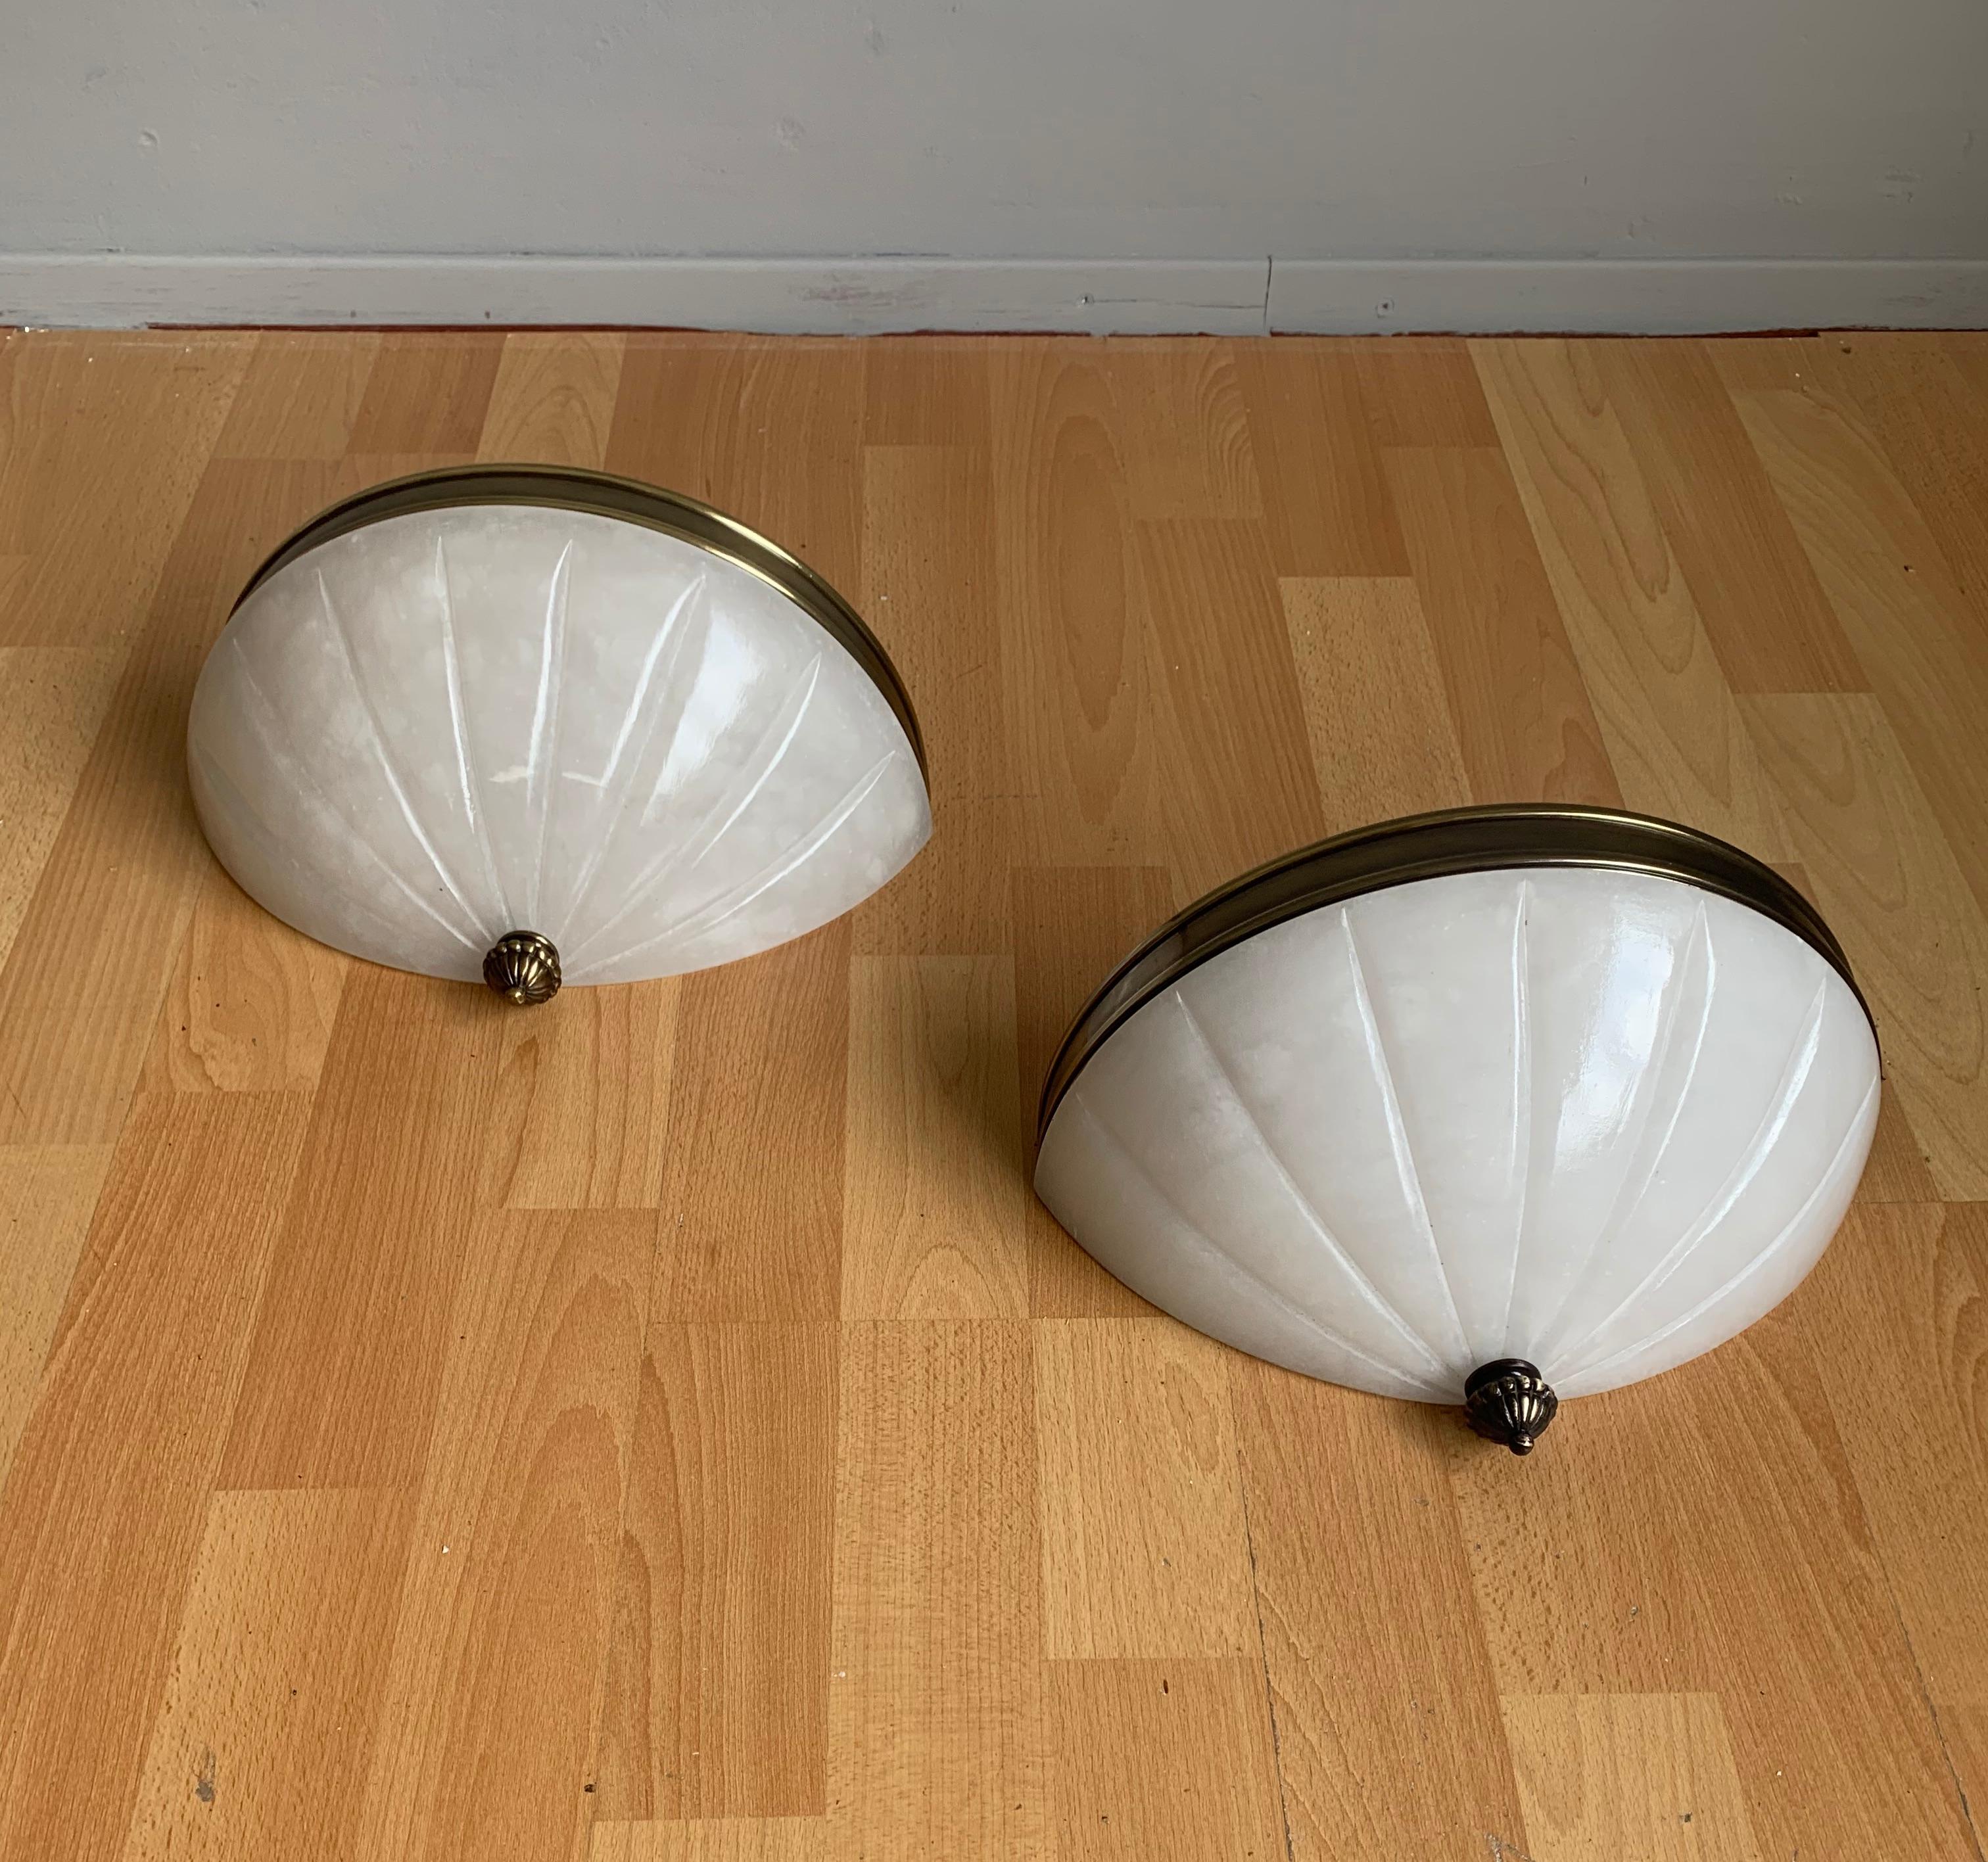 Rare Pair of Midcentury Modern, Alabaster & Brass Wall Sconces / Fixtures For Sale 7